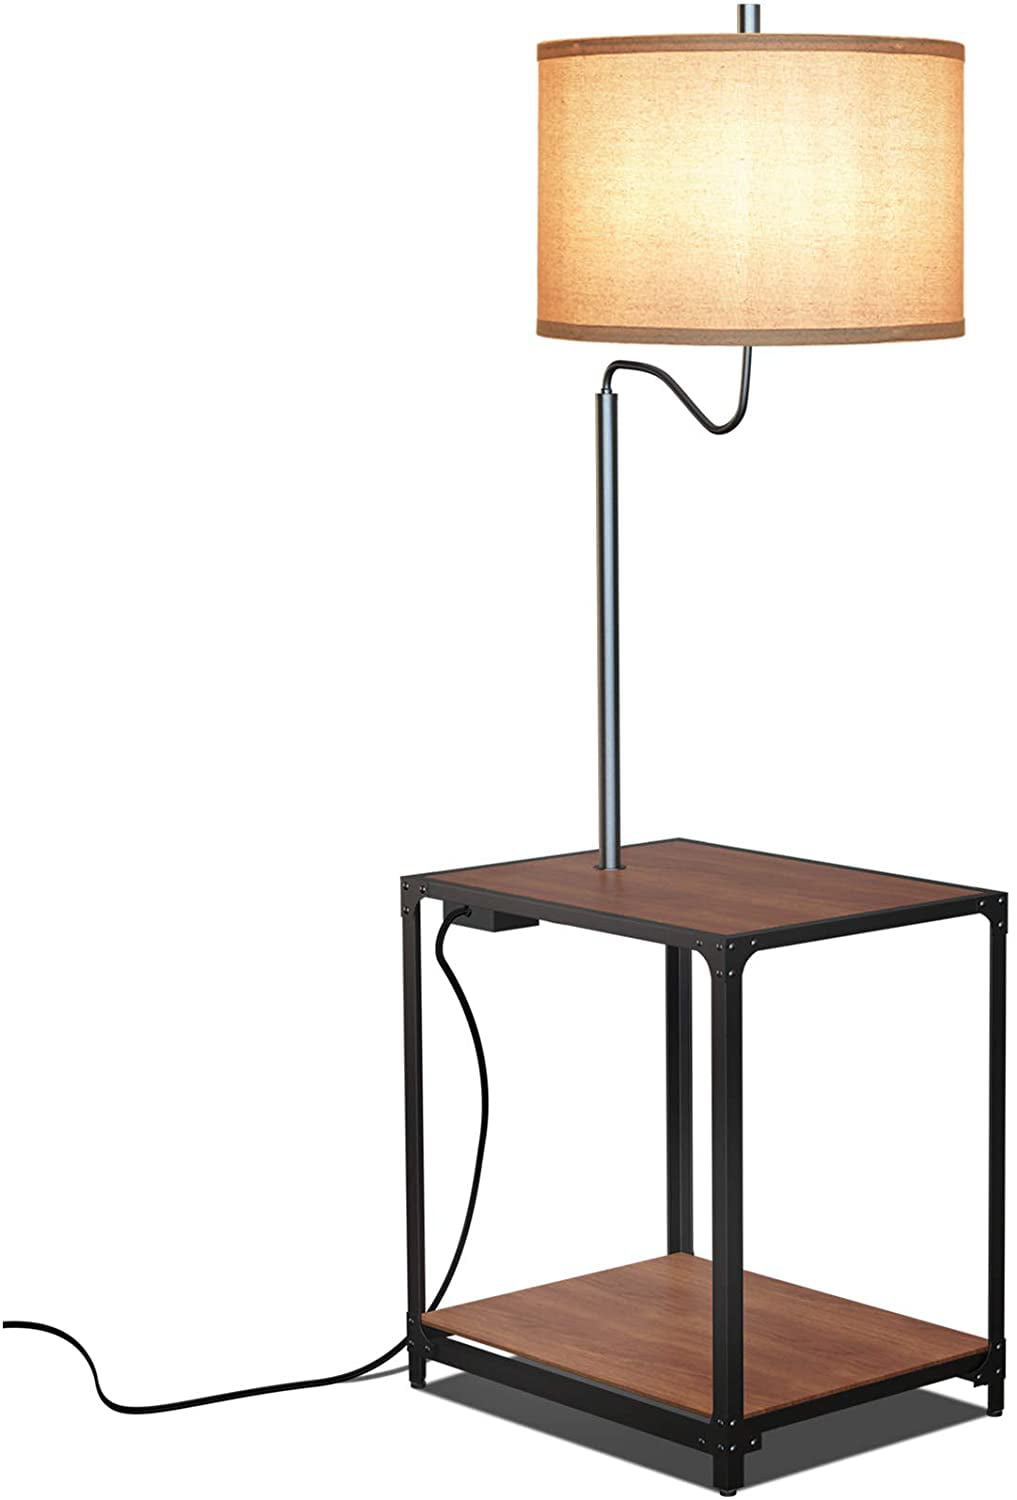 Led Floor Lamp With End Table And Usb, What To Put On End Tables Besides Lamps